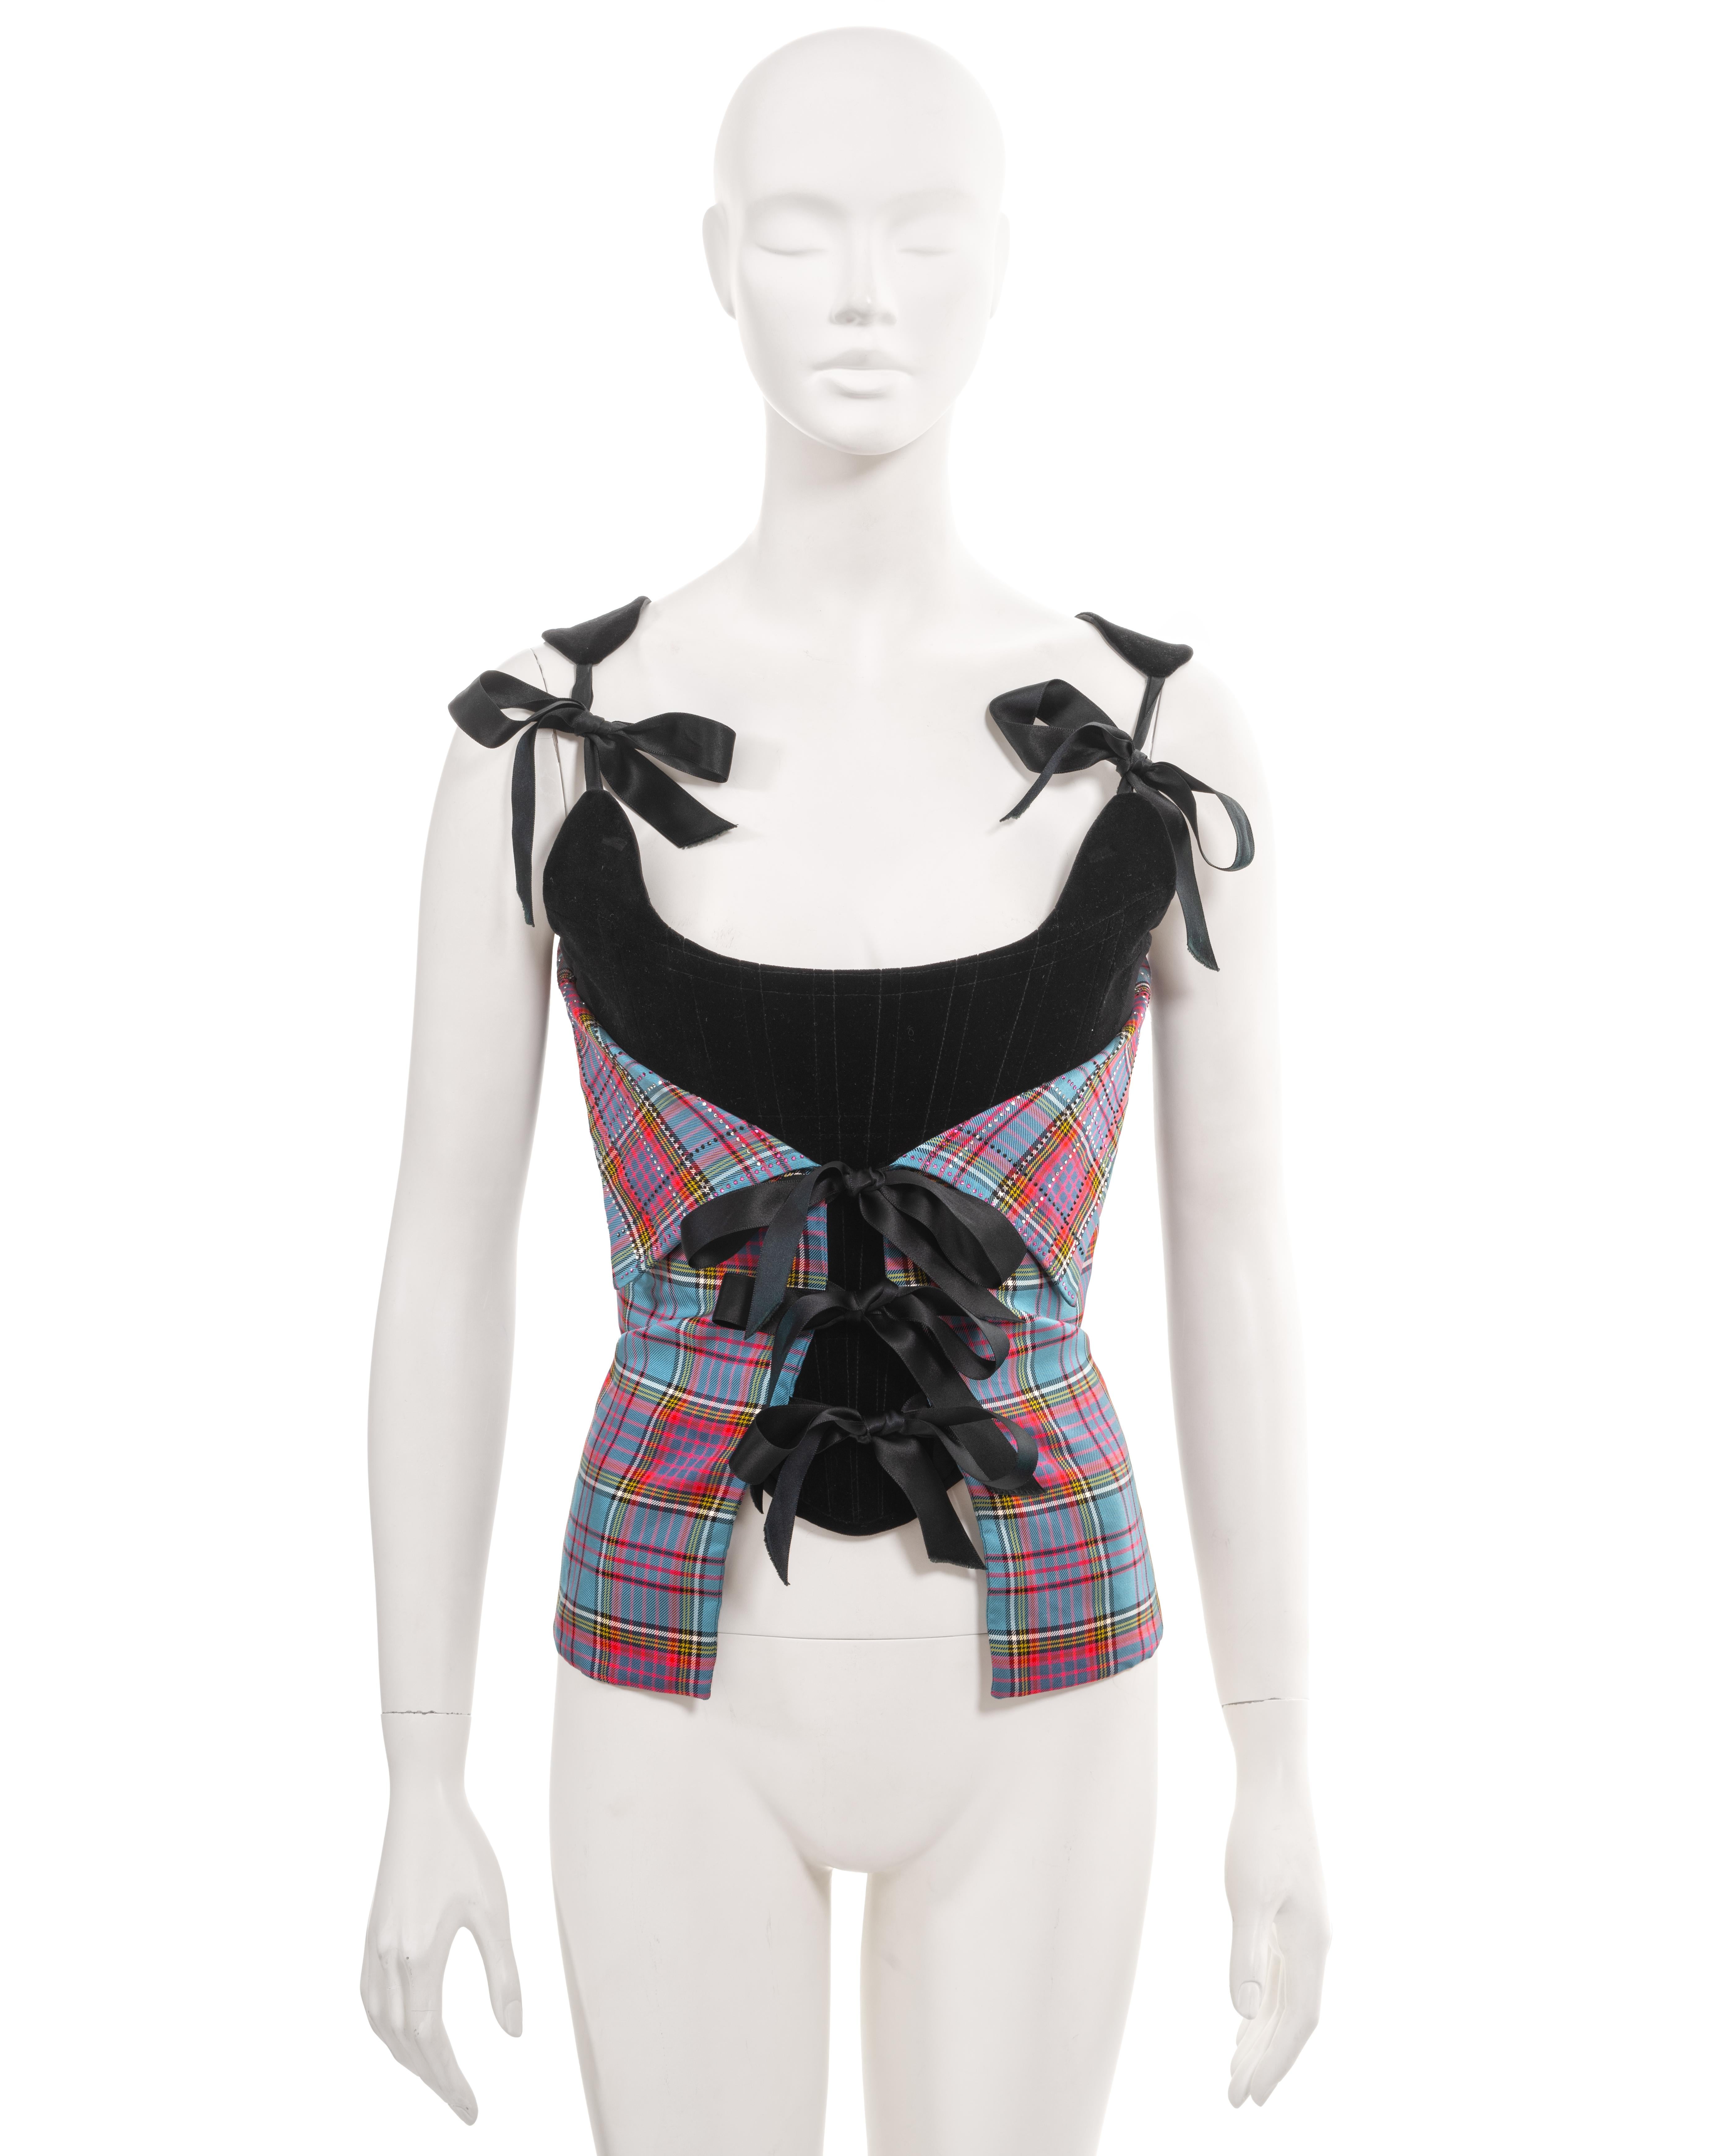 ▪ Archival Vivienne Westwood corset 
▪ Fall-Winter 1993
▪ Sold by One of a Kind Archive
▪ Black velvet stomacher and back piece
▪ Black power-mesh corset bodice 
▪ Signature MacAndreas tartan silk overlay with the collar adorned with crystals